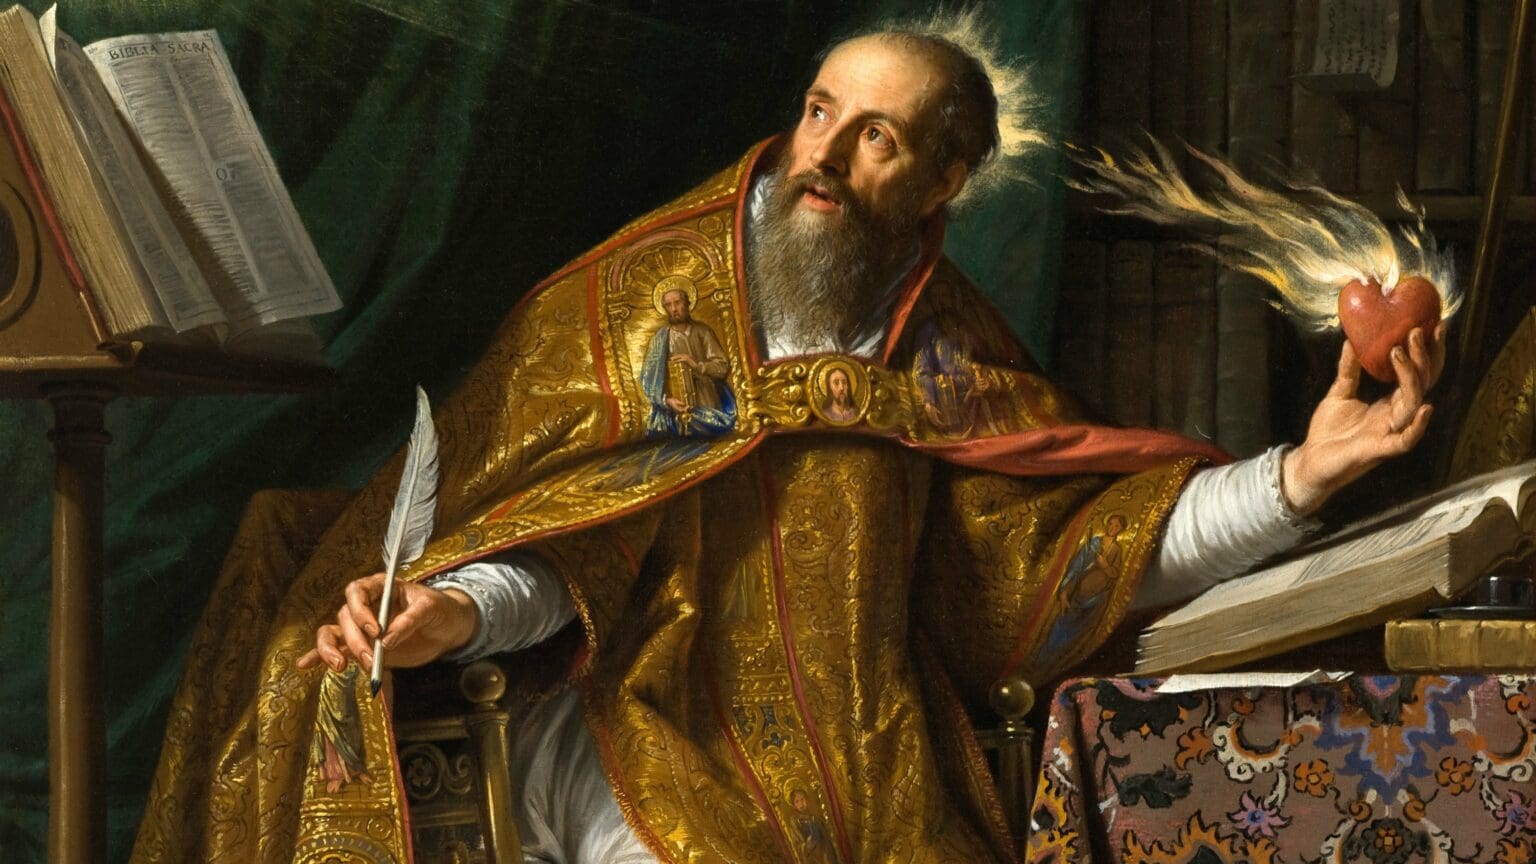 Saint Augustine’s Critique of Religion Without Morality